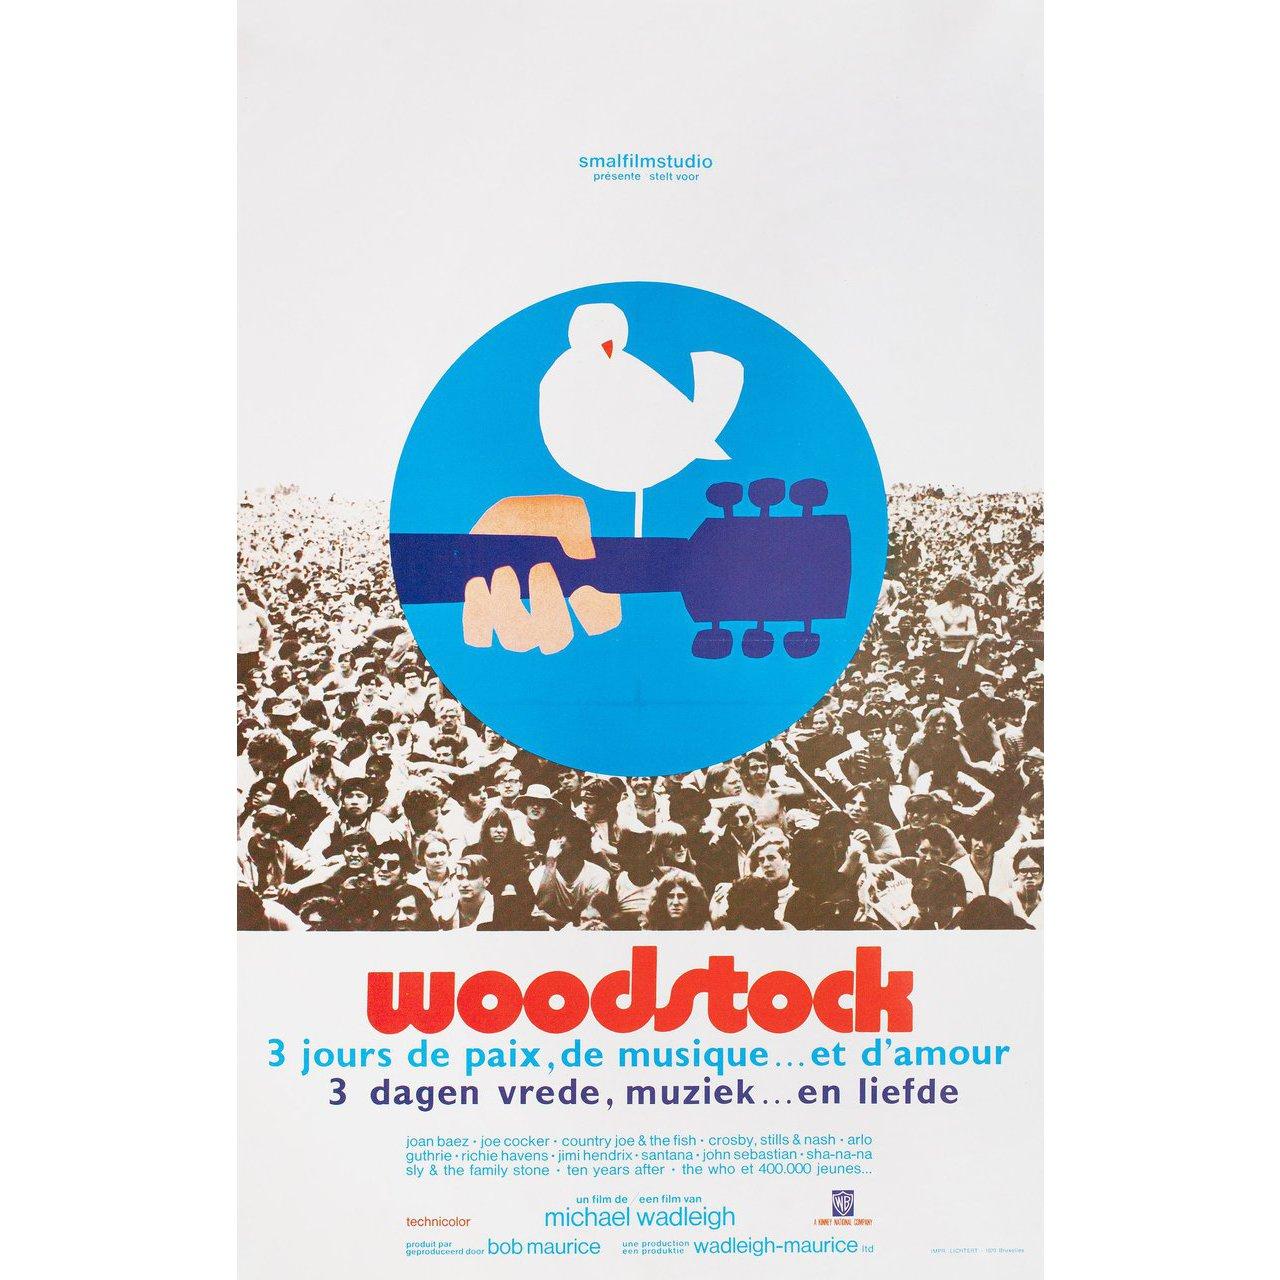 Original 1970 Belgian poster by Arnold Skolnick for the documentary film Woodstock directed by Michael Wadleigh with Richie Havens / Joan Baez / The Who / Sha-Na-Na. Fine condition, folded. Many original posters were issued folded or were